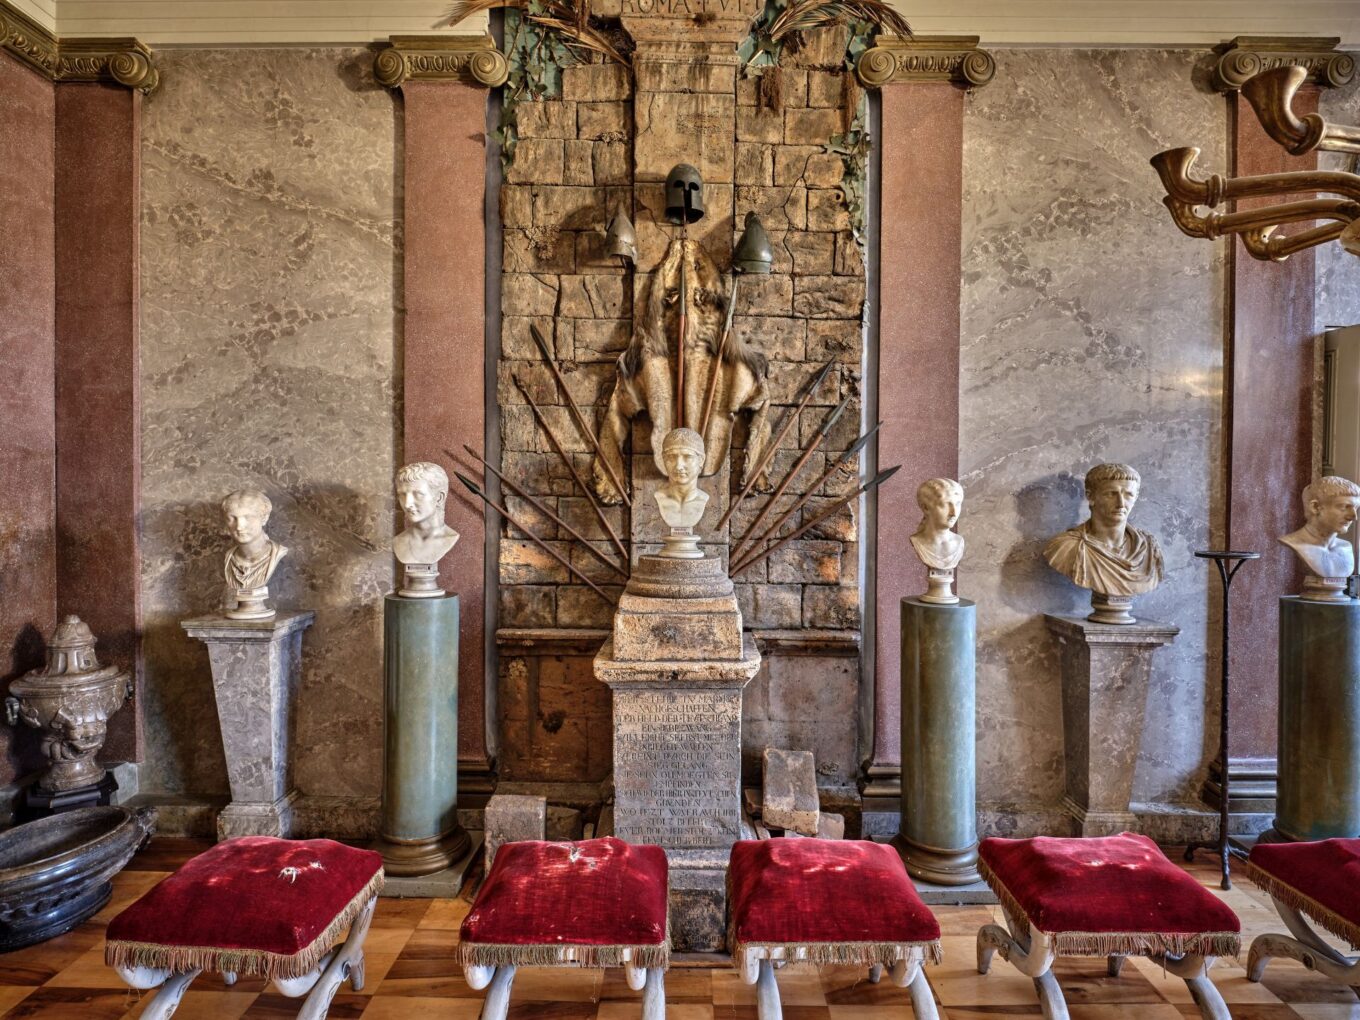 Emperors' busts in the second Roman Room